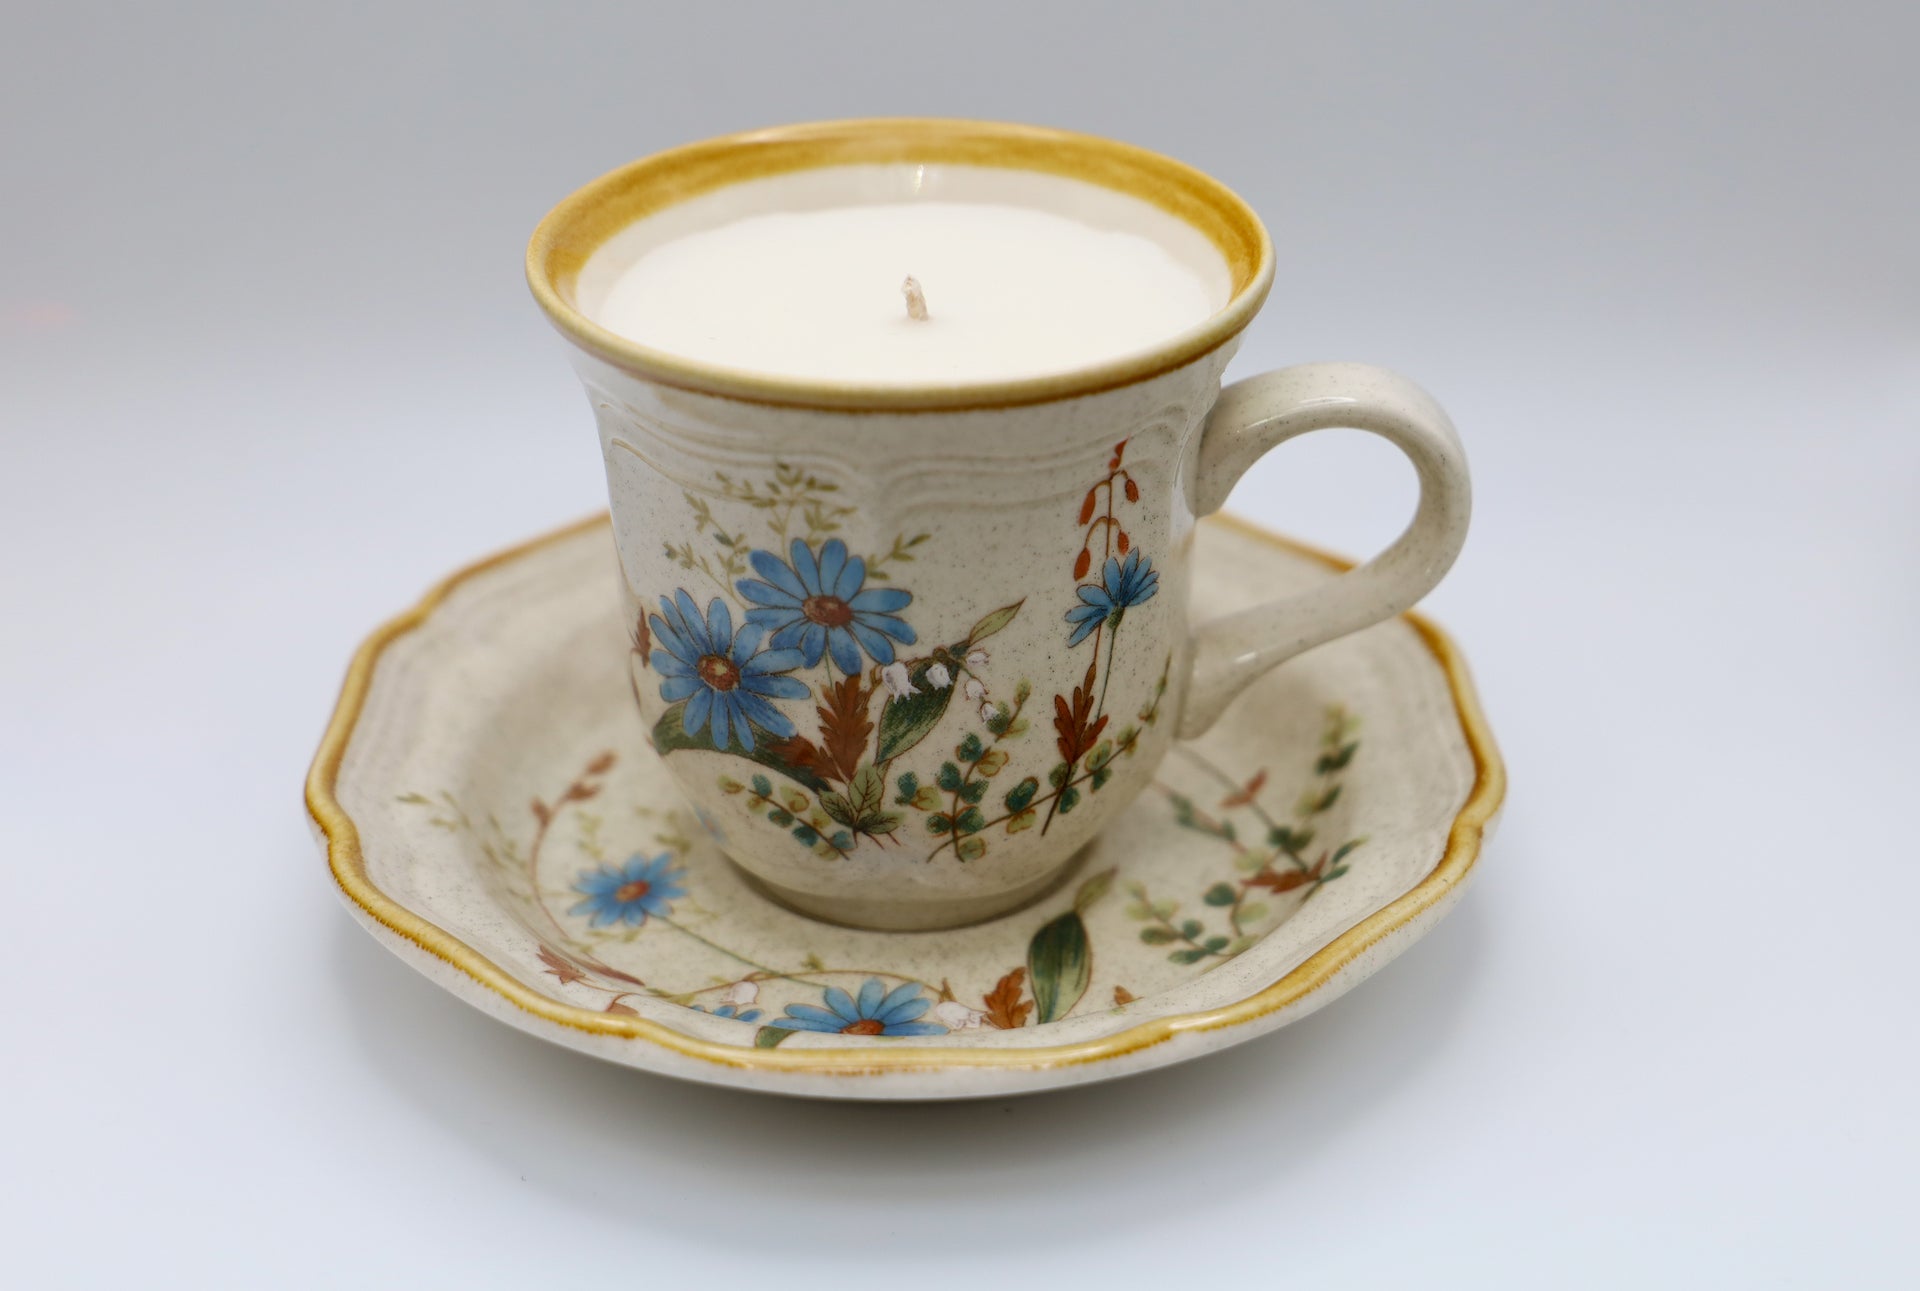 Mikasa Cup and Saucer in Blue Daisies pattern with Apricot Grove scented soy candle